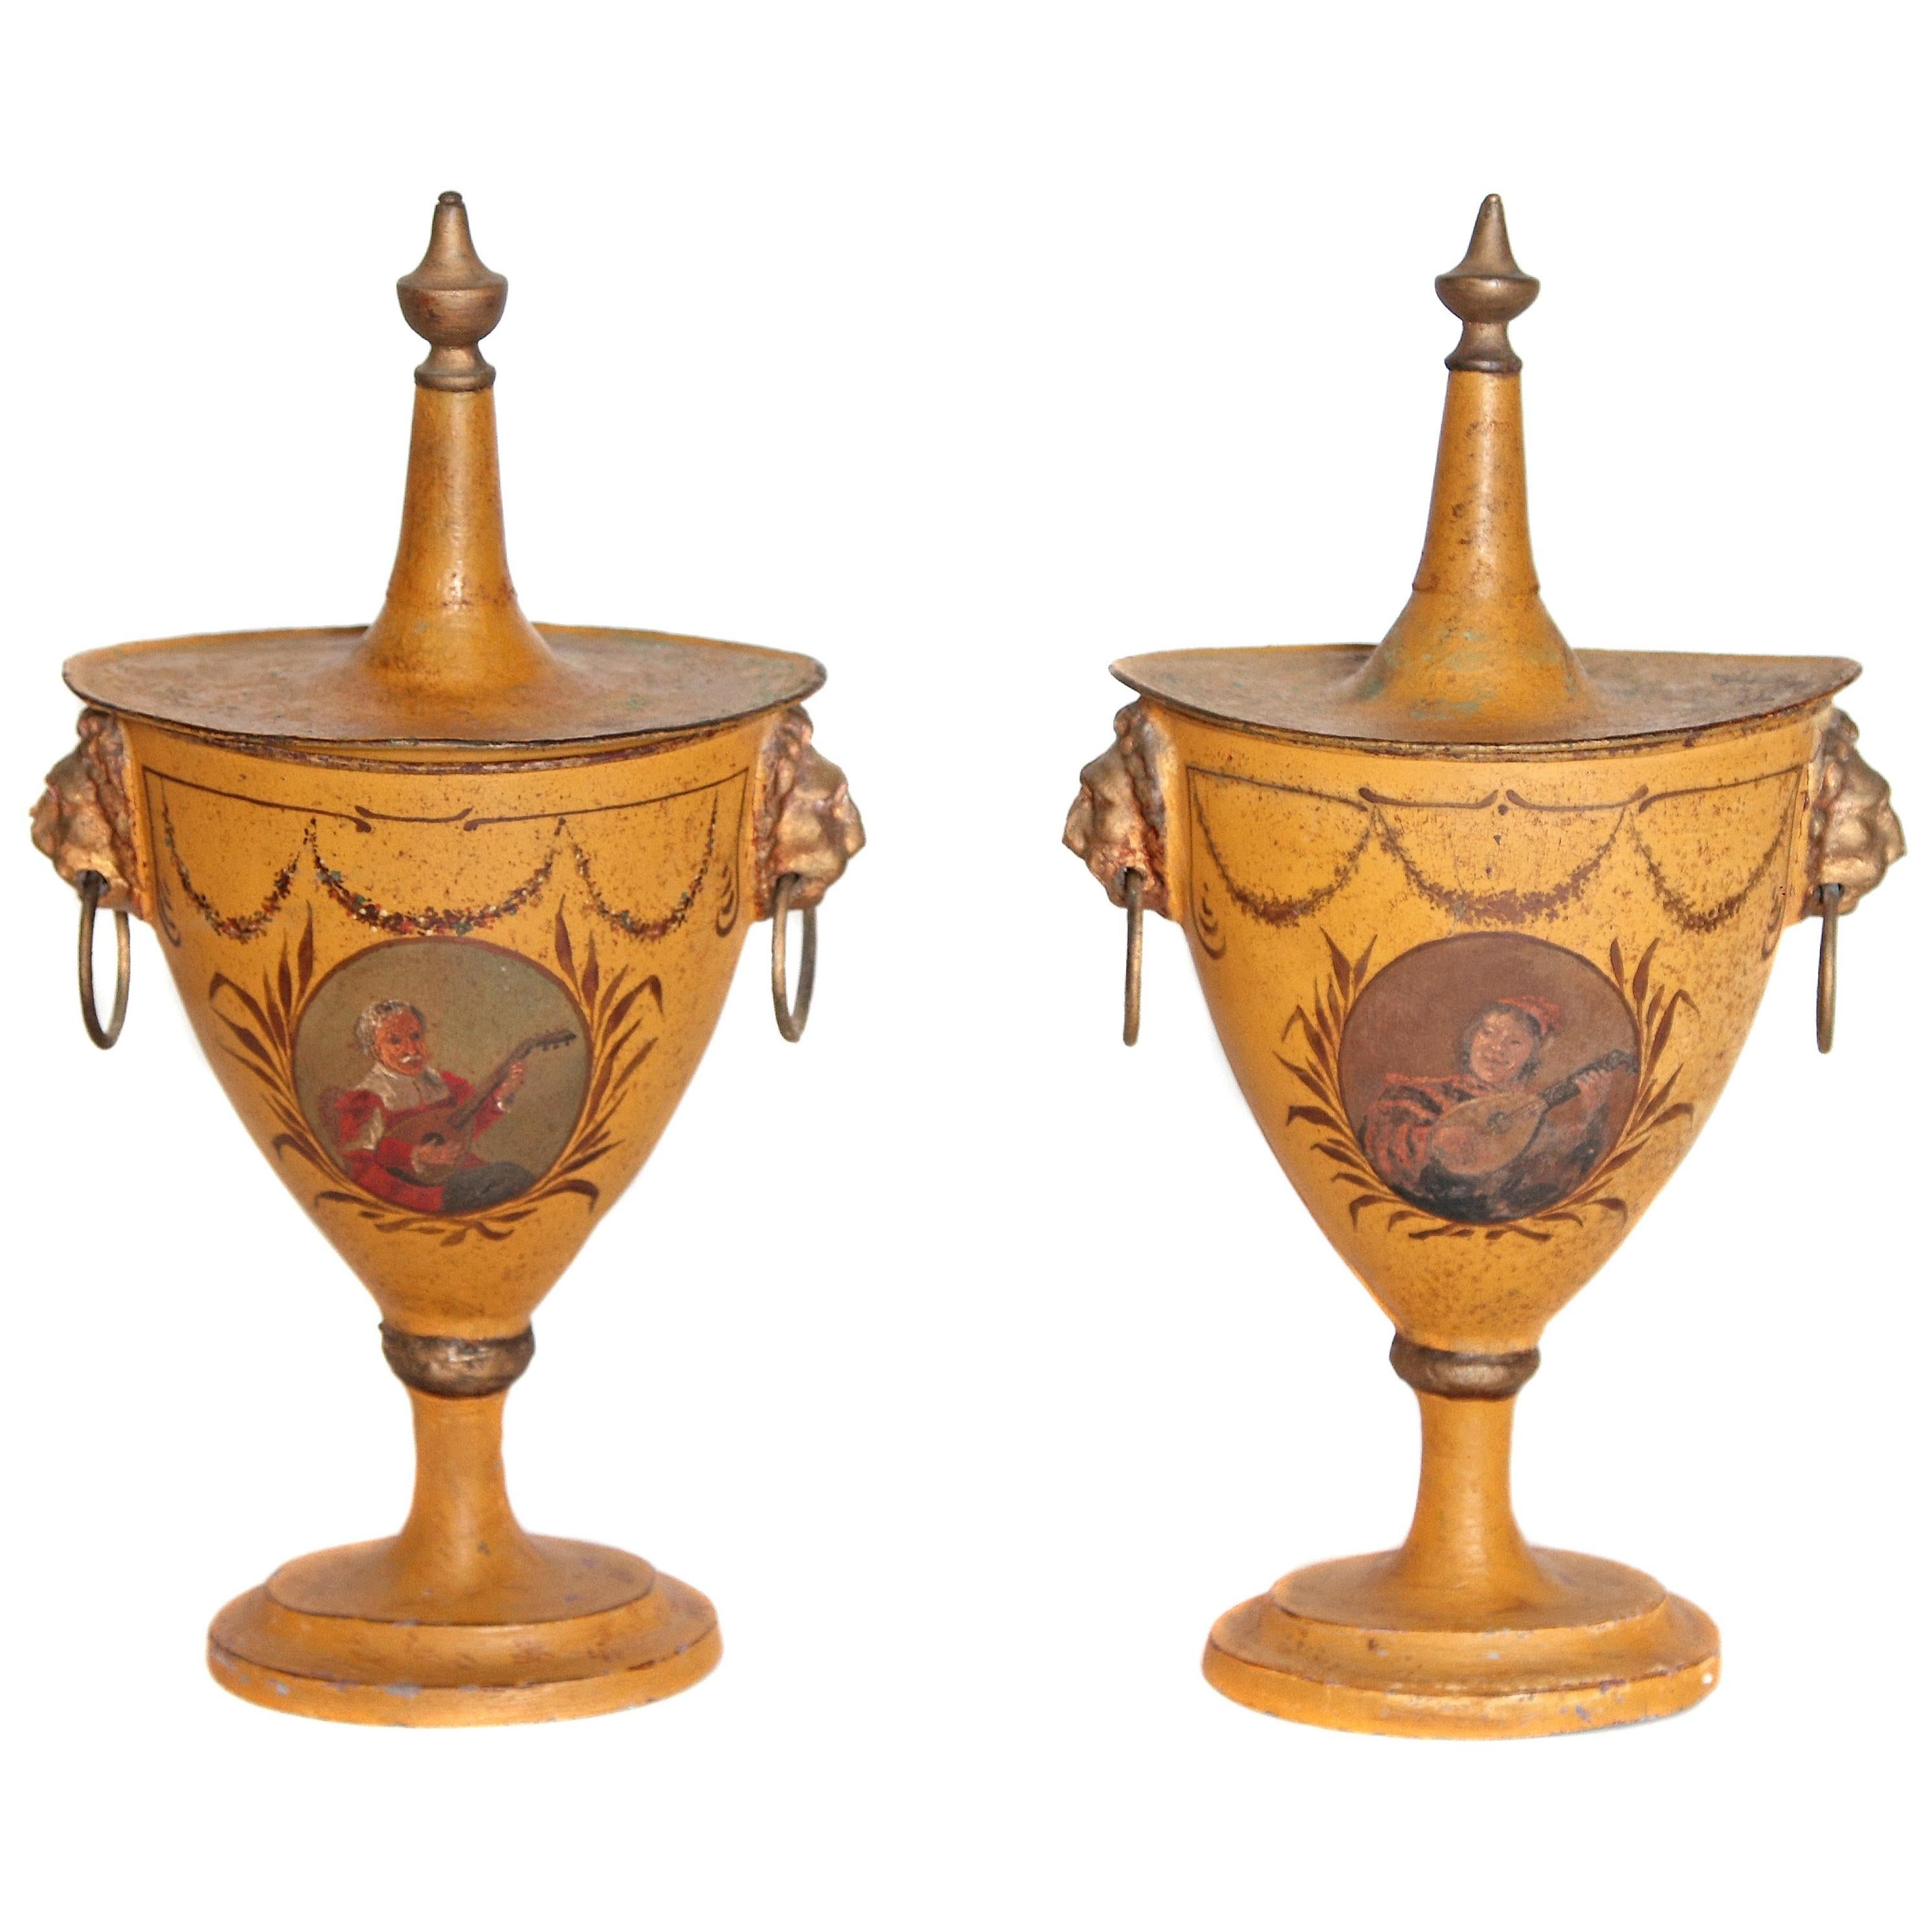 Pair of English Regency Tole Painted Chestnut Urns